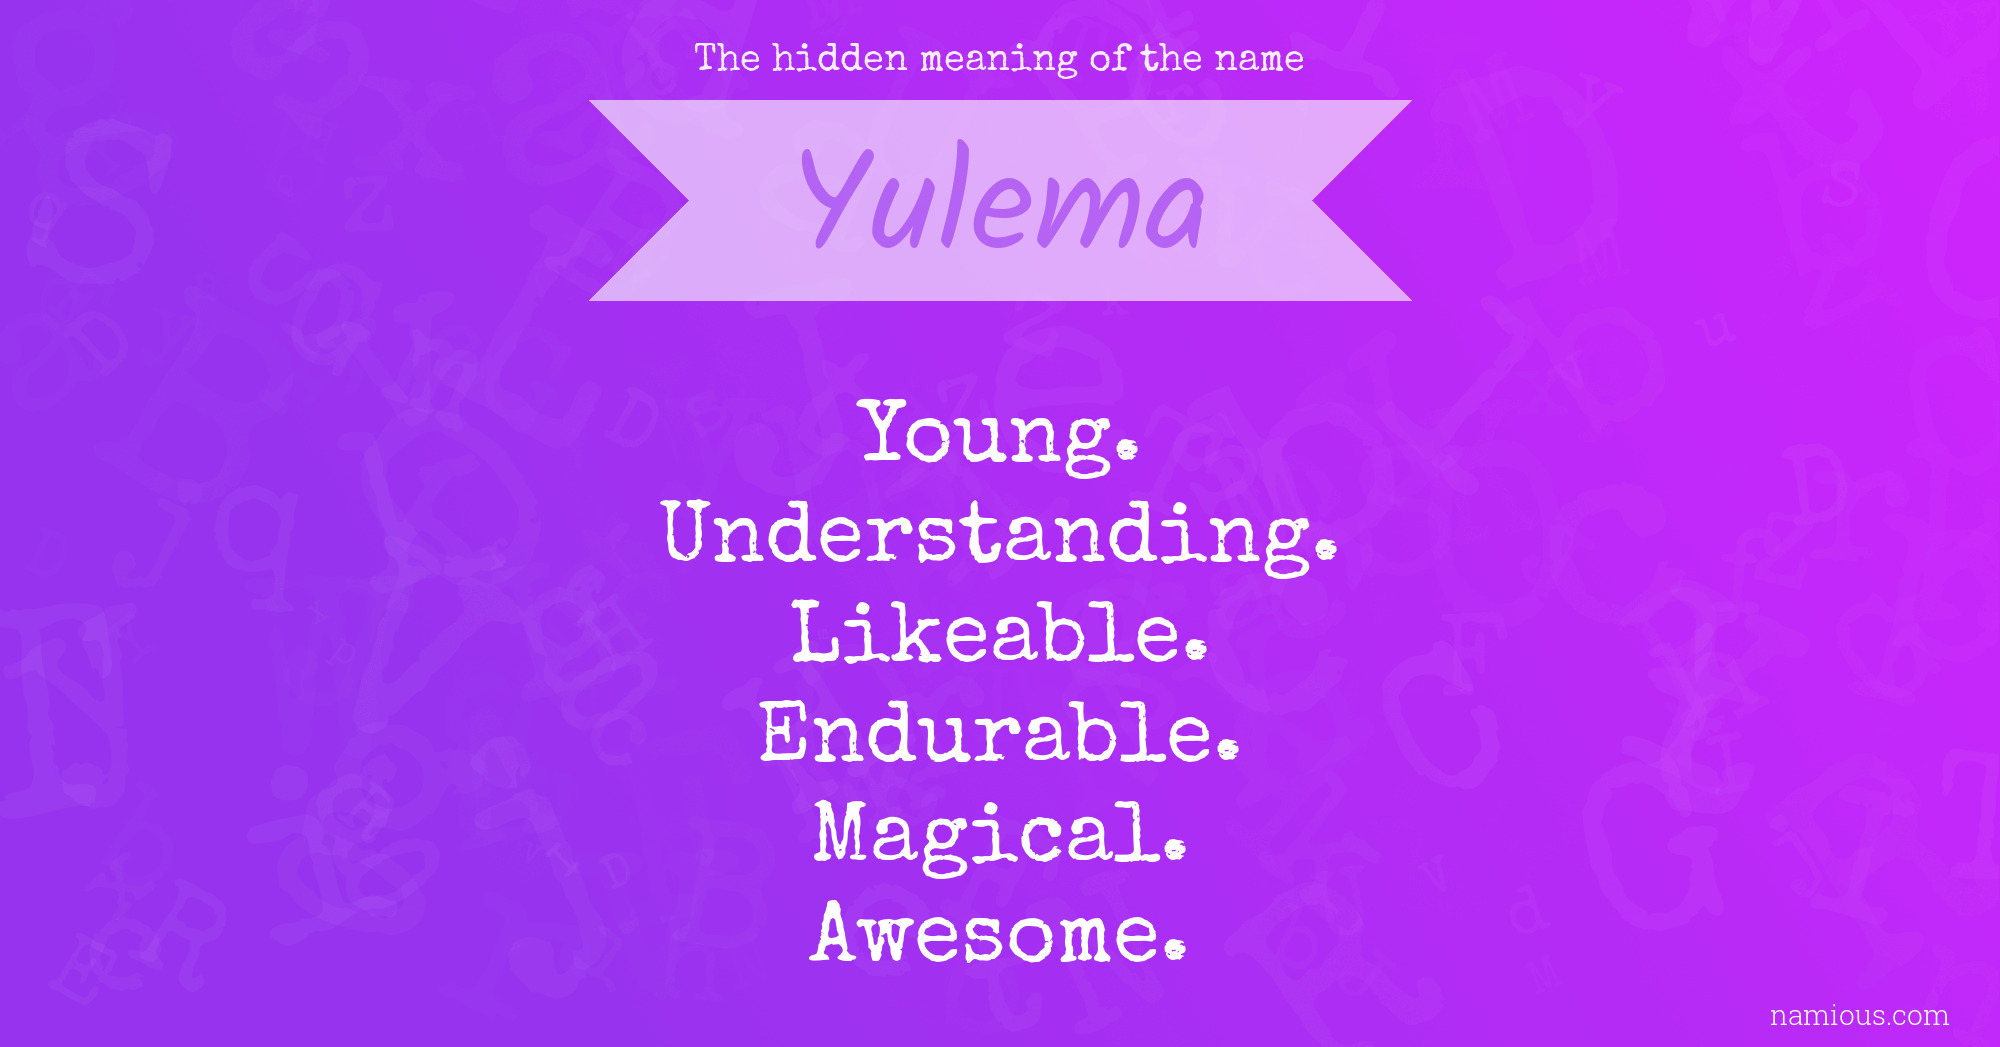 The hidden meaning of the name Yulema